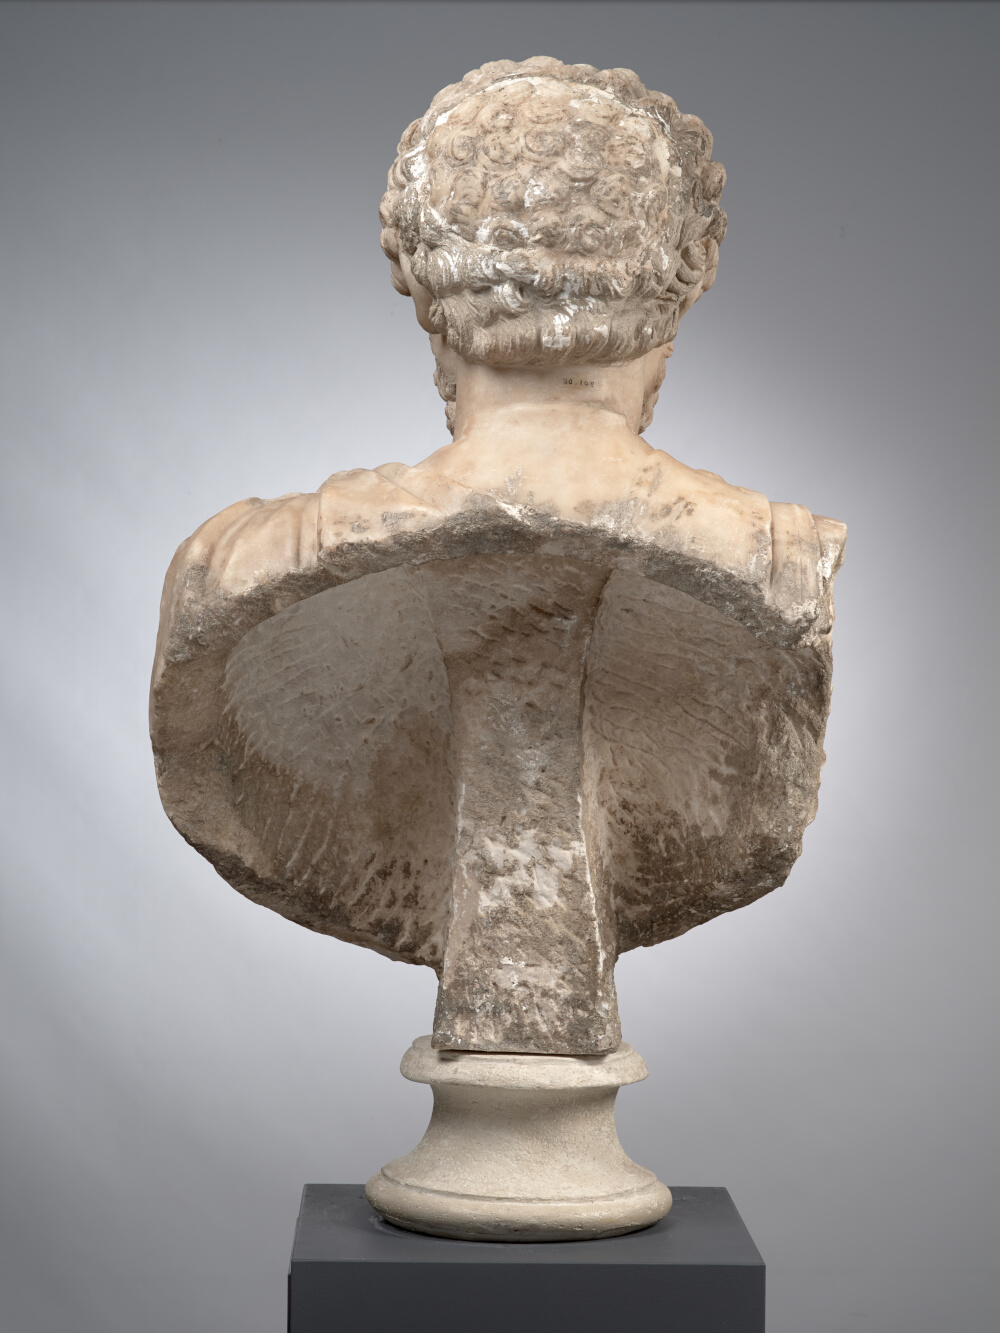 Bust of Marcus Aurelius, older and wearing a cuirass